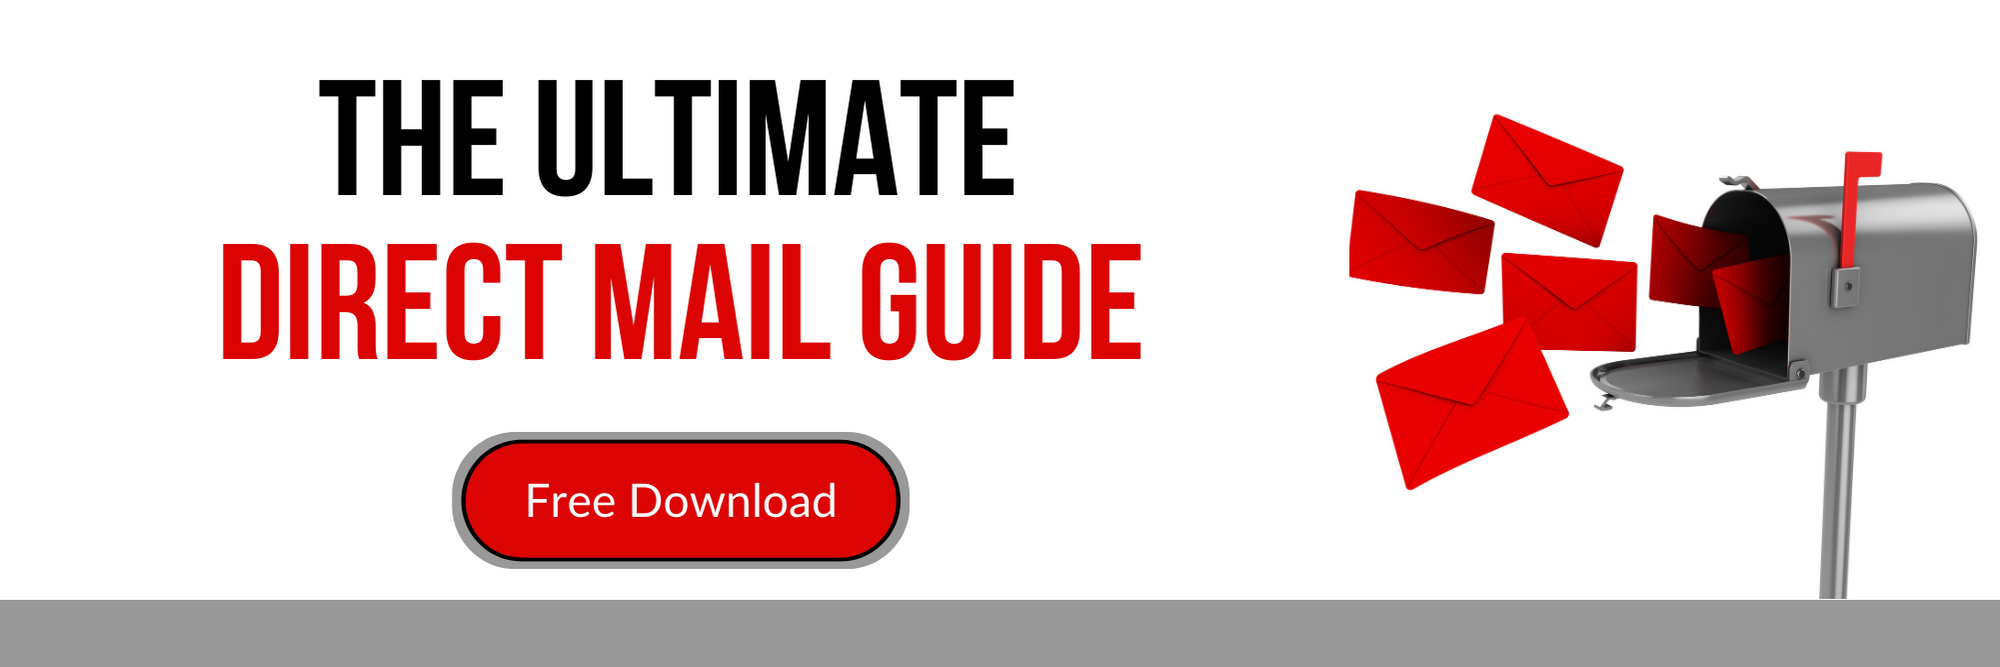 DynaGraphics Ultimate Mail Guide Homepage